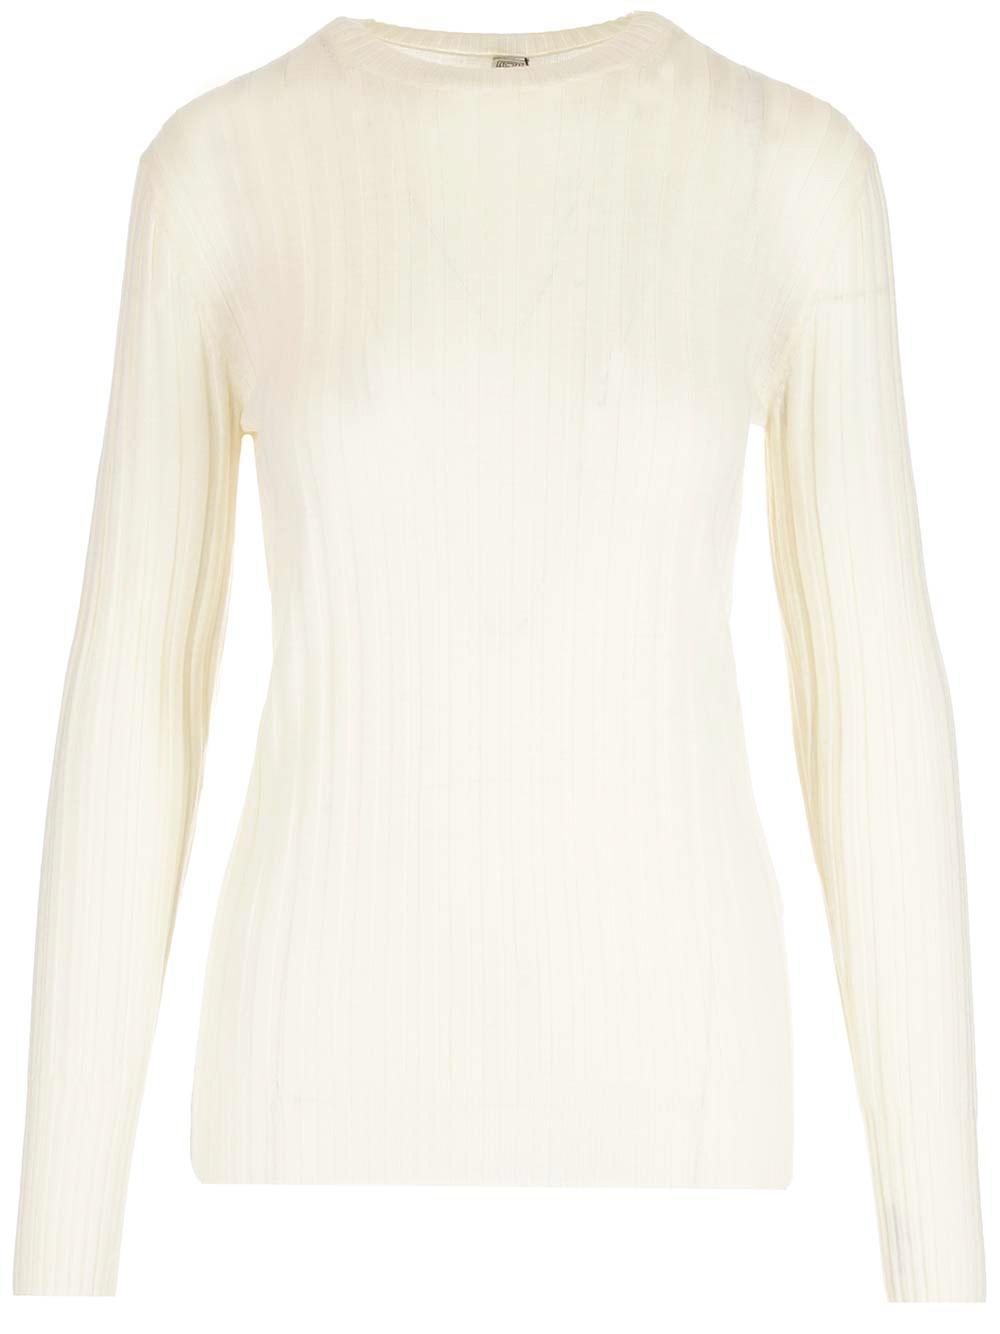 Totême Ivory Ribbed Sweater in White | Lyst